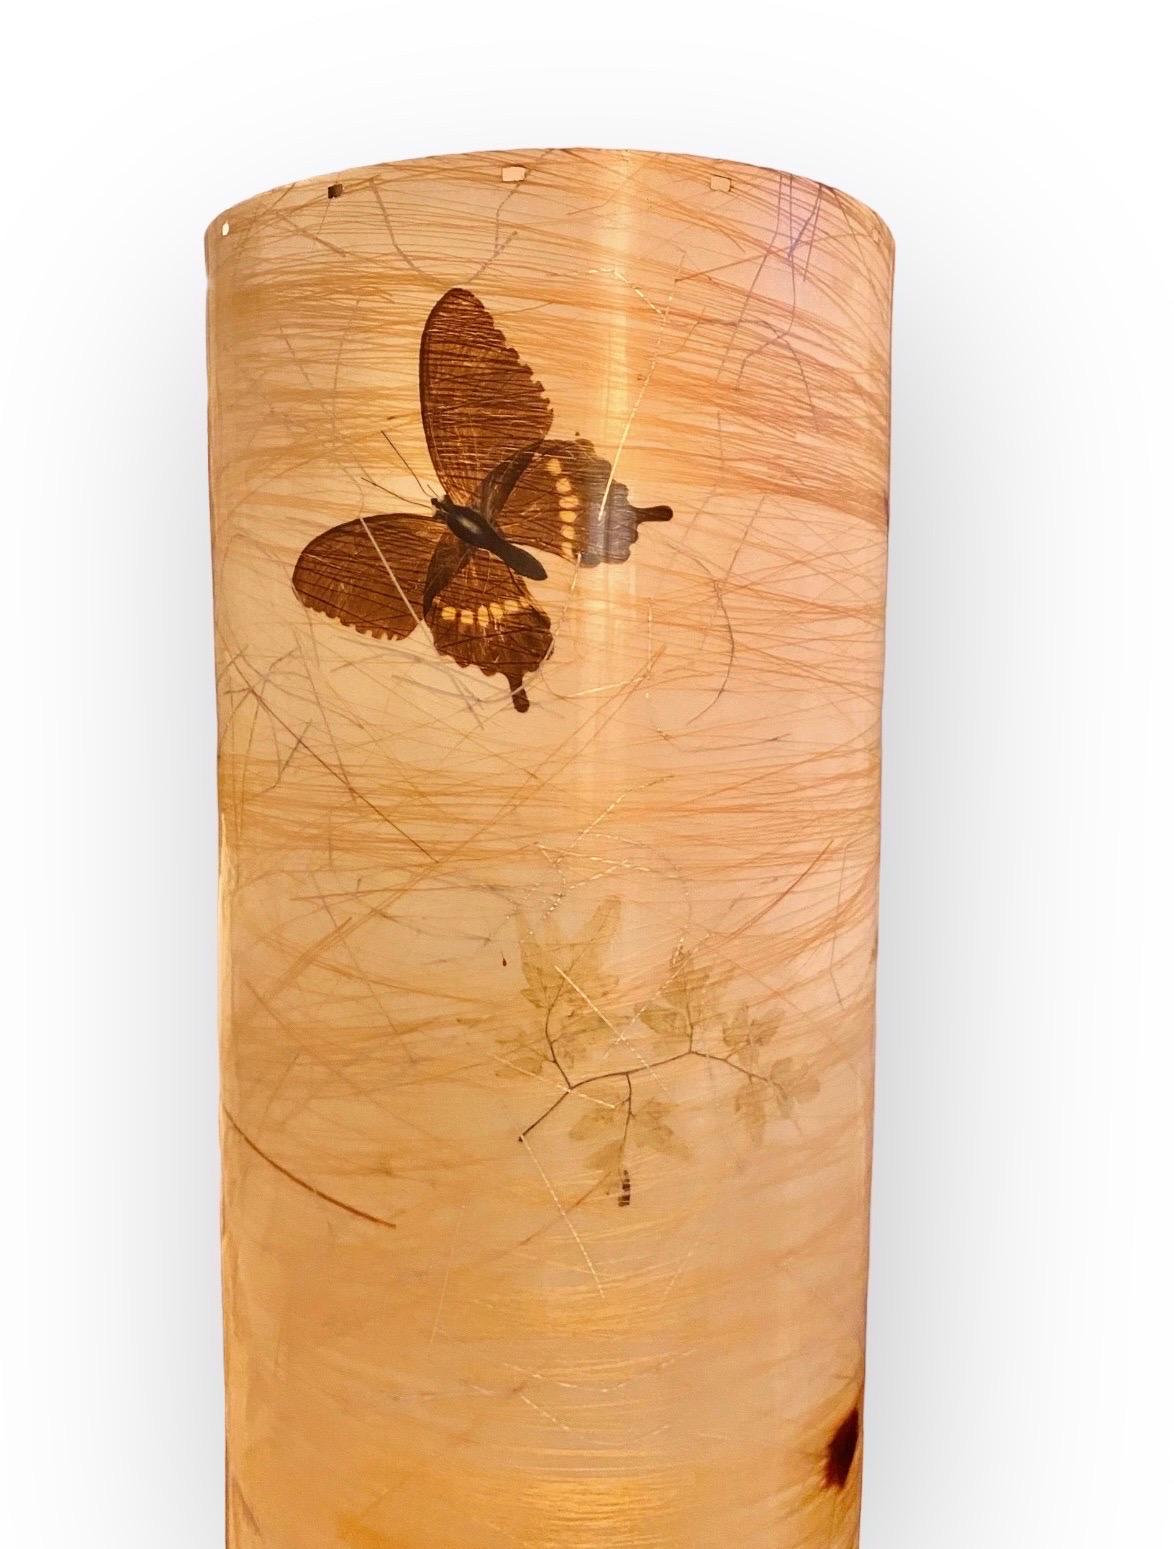 Think warm glow, a mid century modern lantern, accent lamp creating a mood of painterly color with butterflies and leaves pattern. That best describes the artful glow of this illuminated treasure.
A perfect welcoming accent to any kitchen, dining or